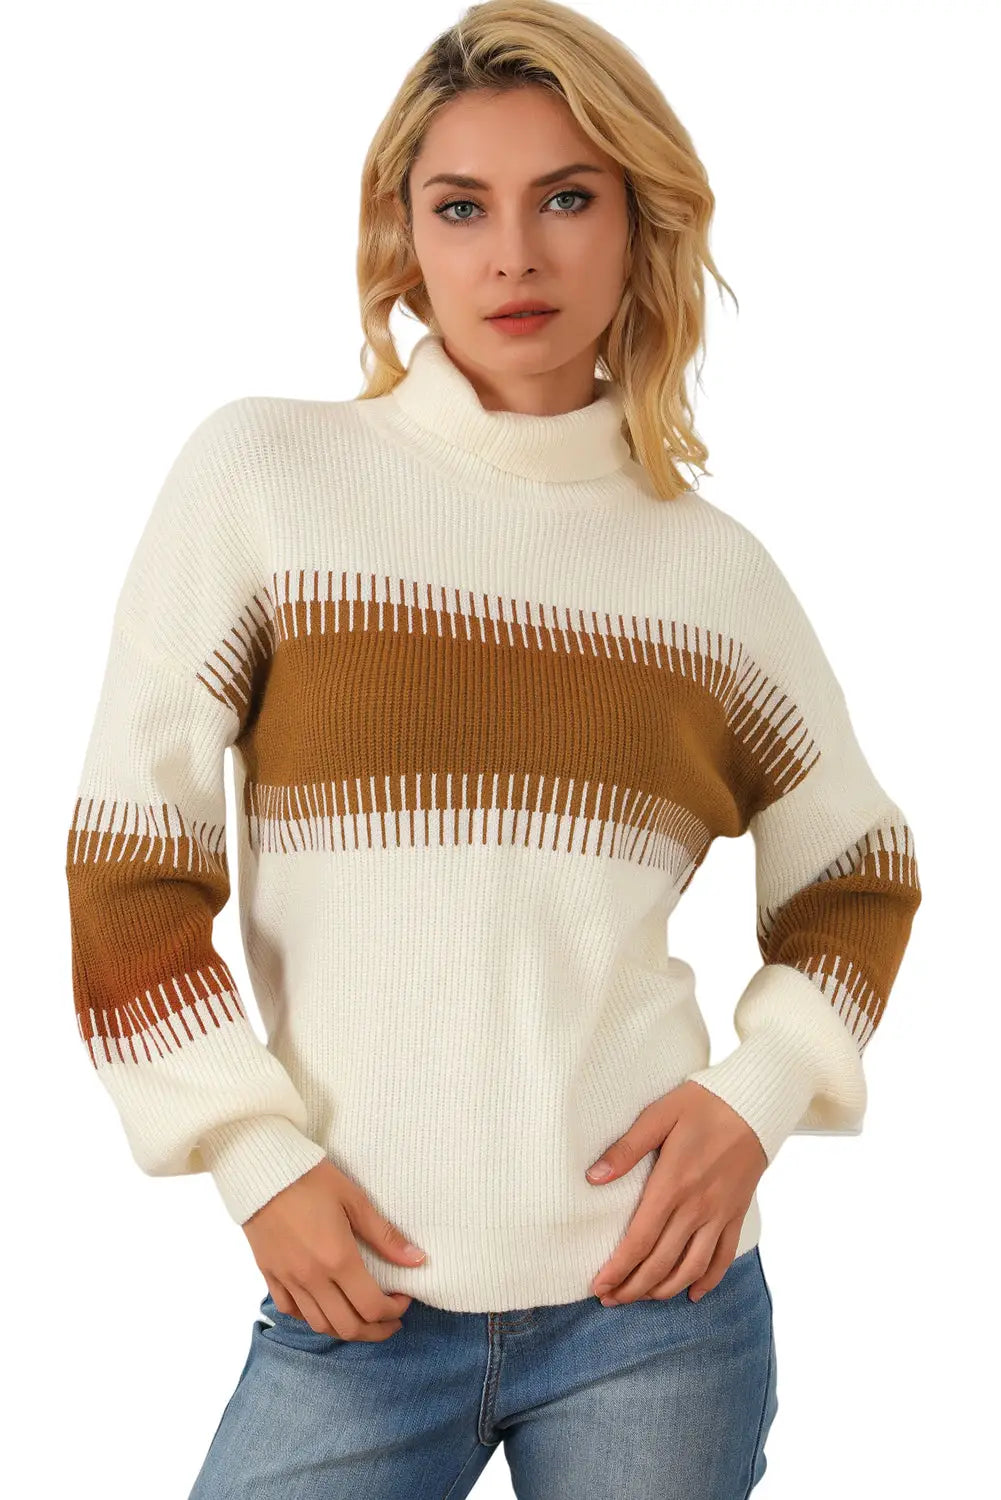 White Printed Patchwork Turtle Neck Knitted Sweater-13